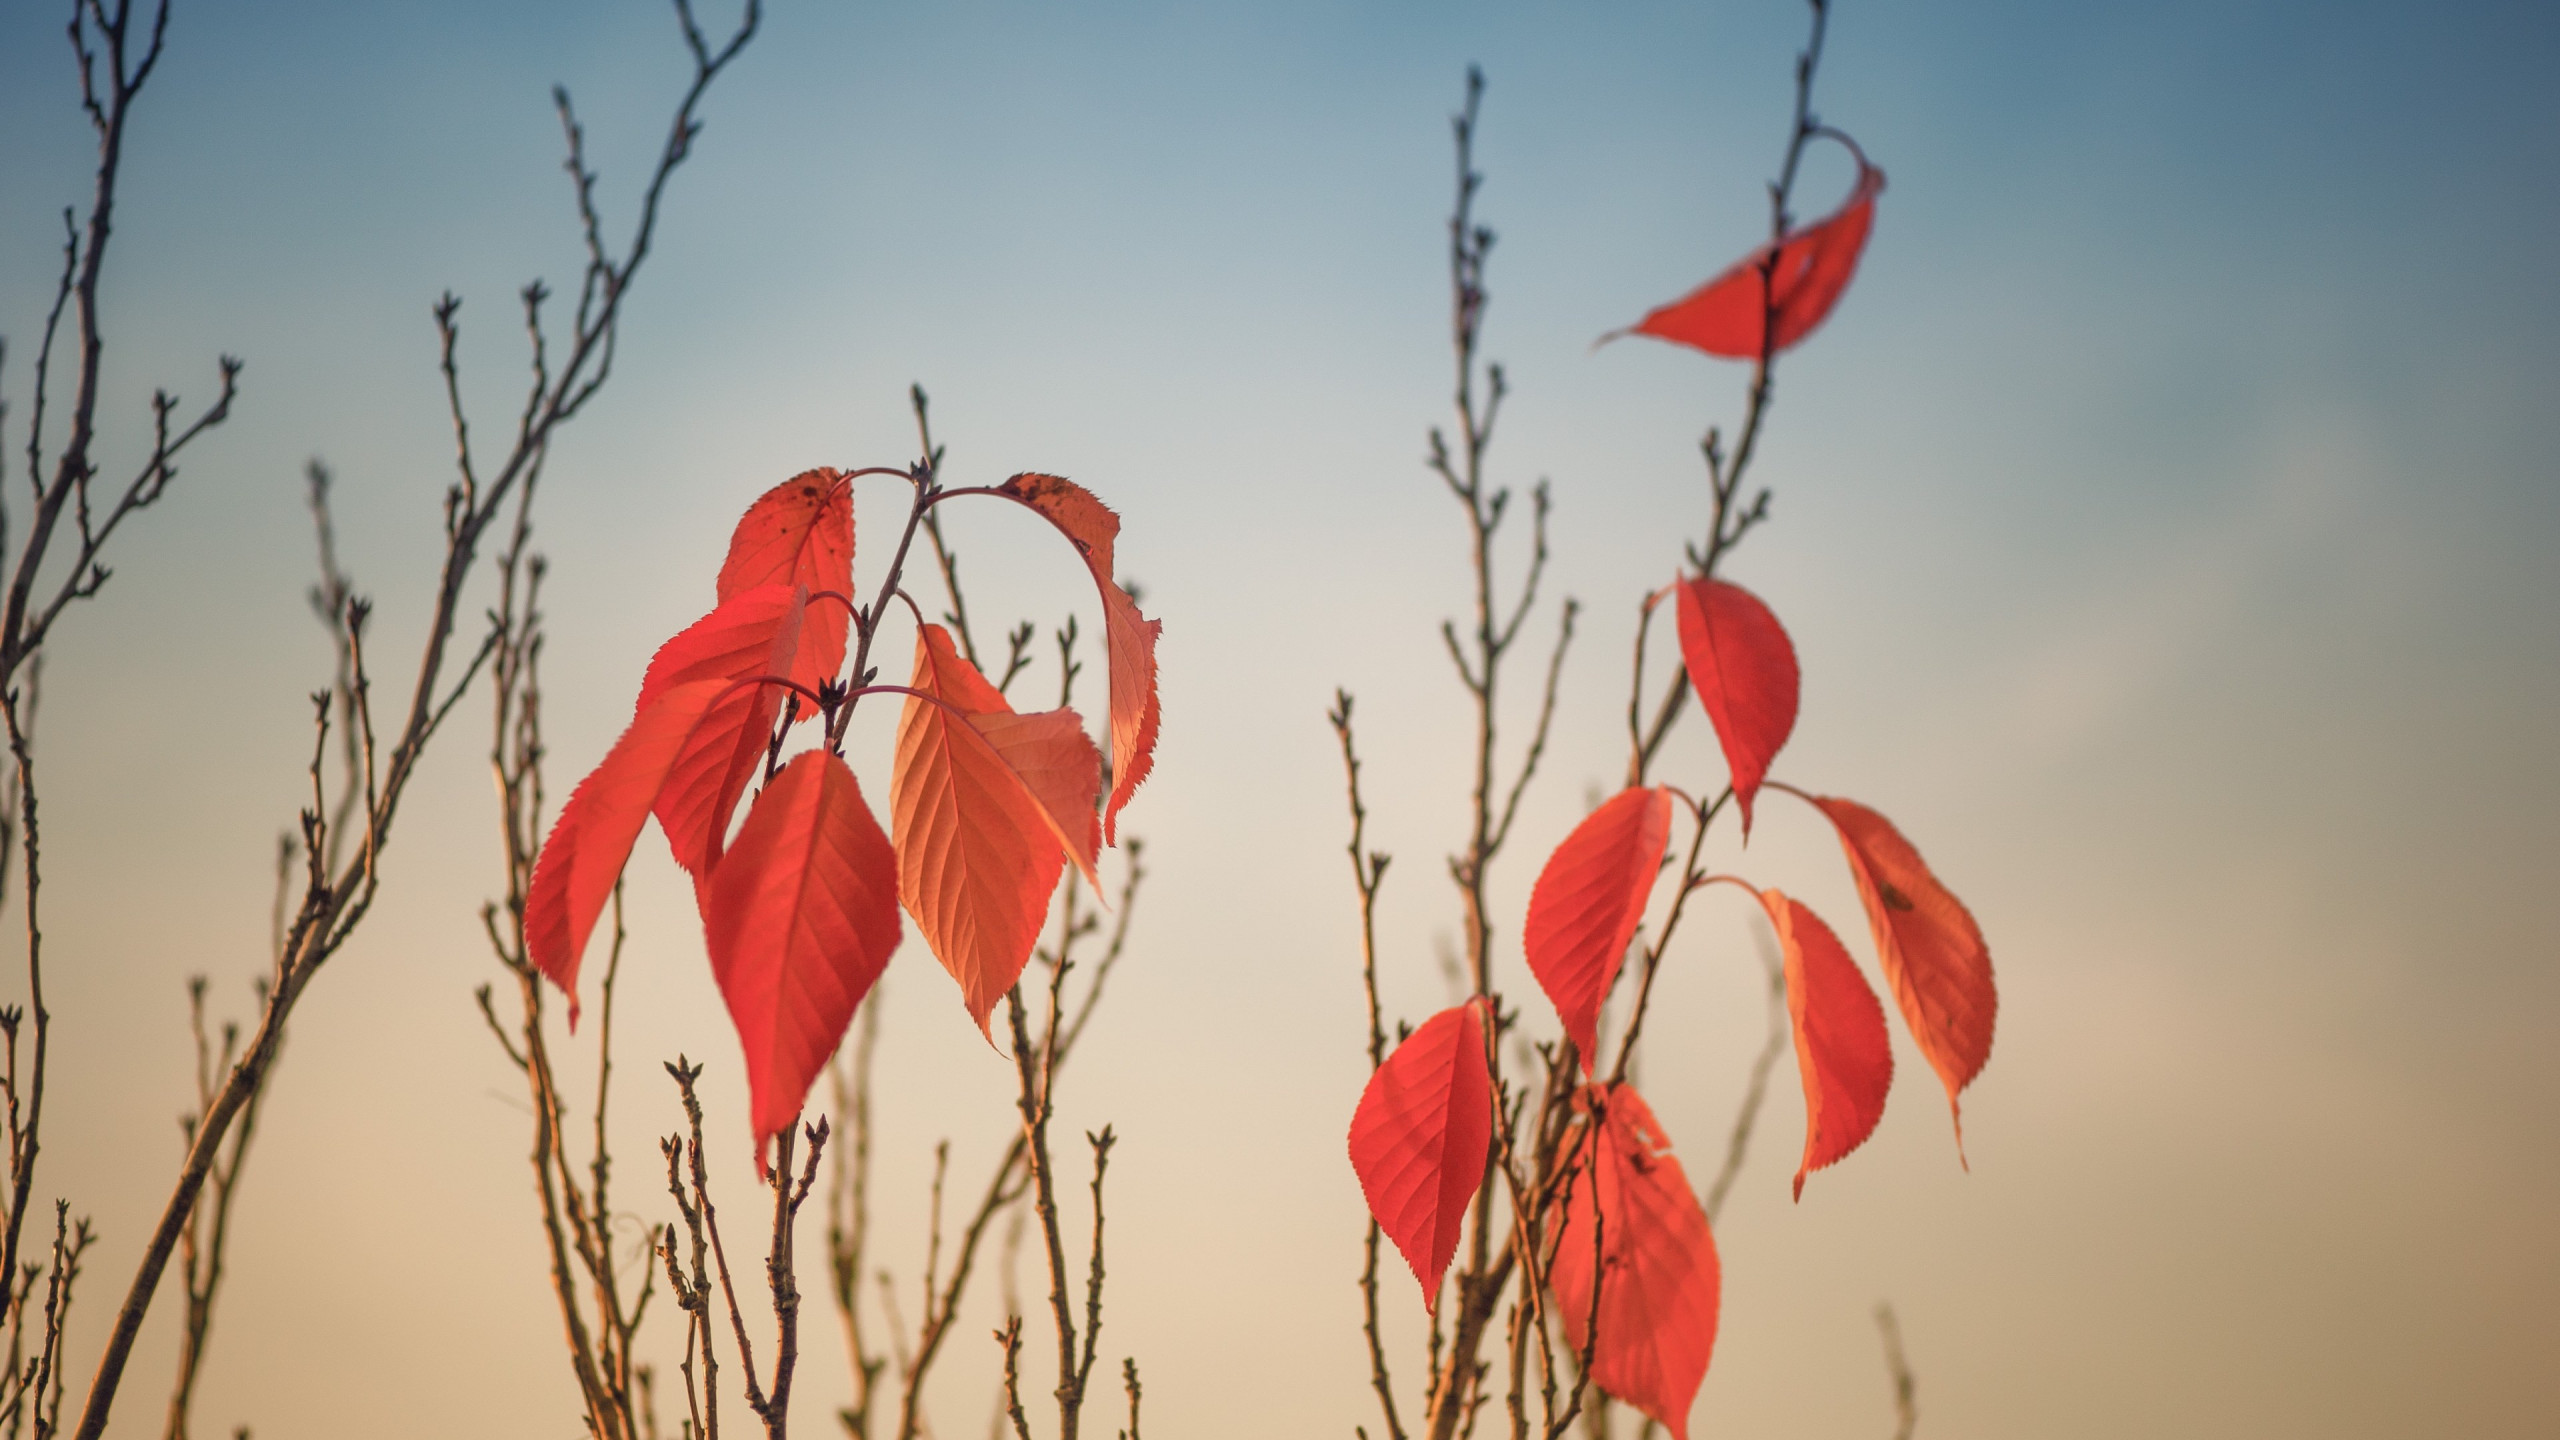 Autumn leaves on tree branches wallpaper 2560x1440